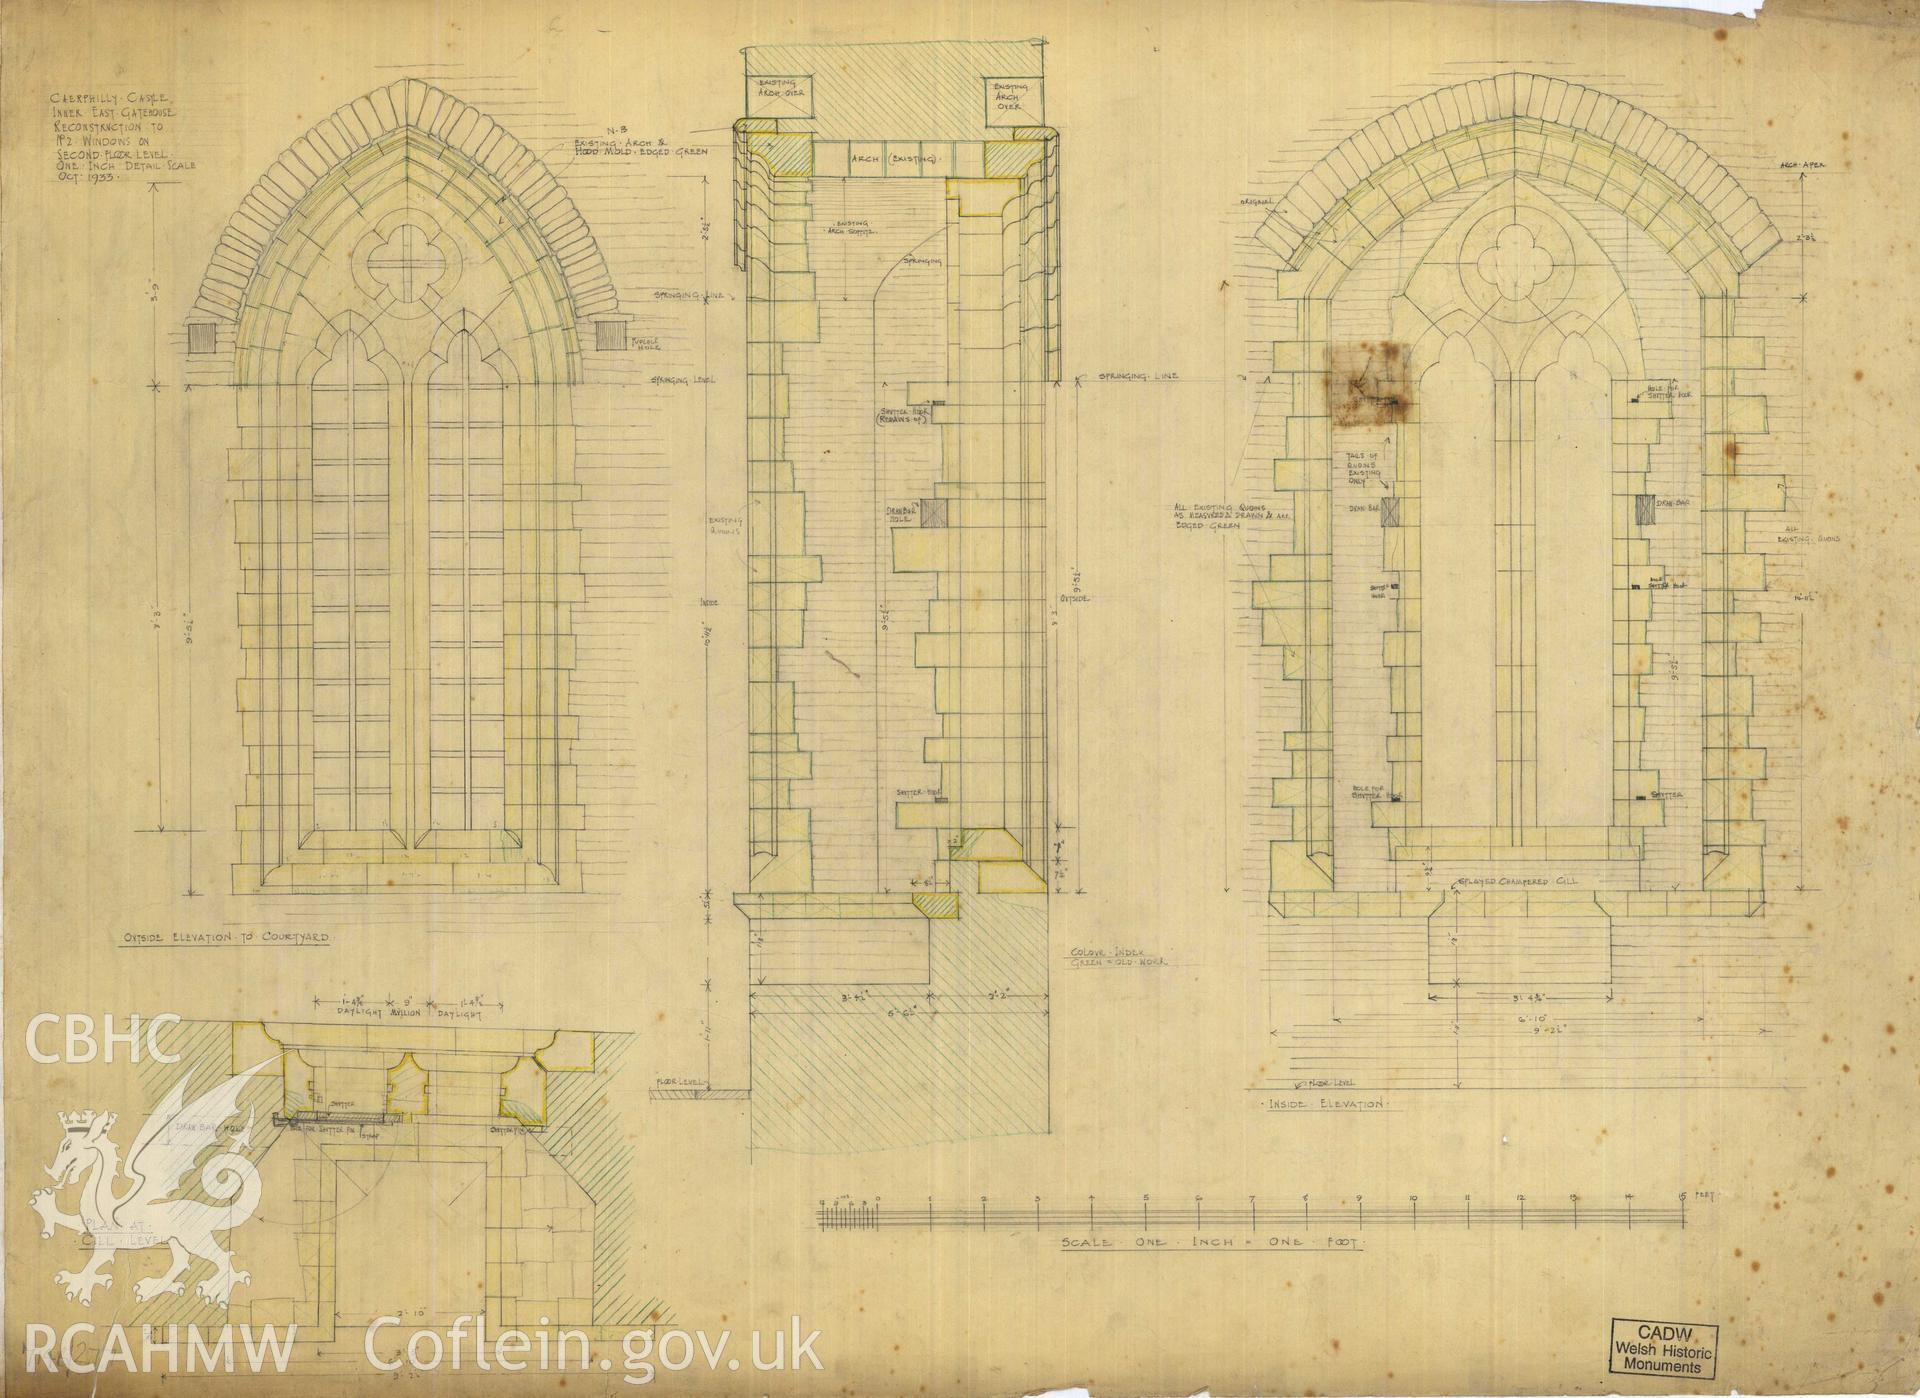 Cadw guardianship monument drawing of Caerphilly Castle. Inner E gate, top floor E window. Cadw Ref. No:714B/277. Scale 1:12.